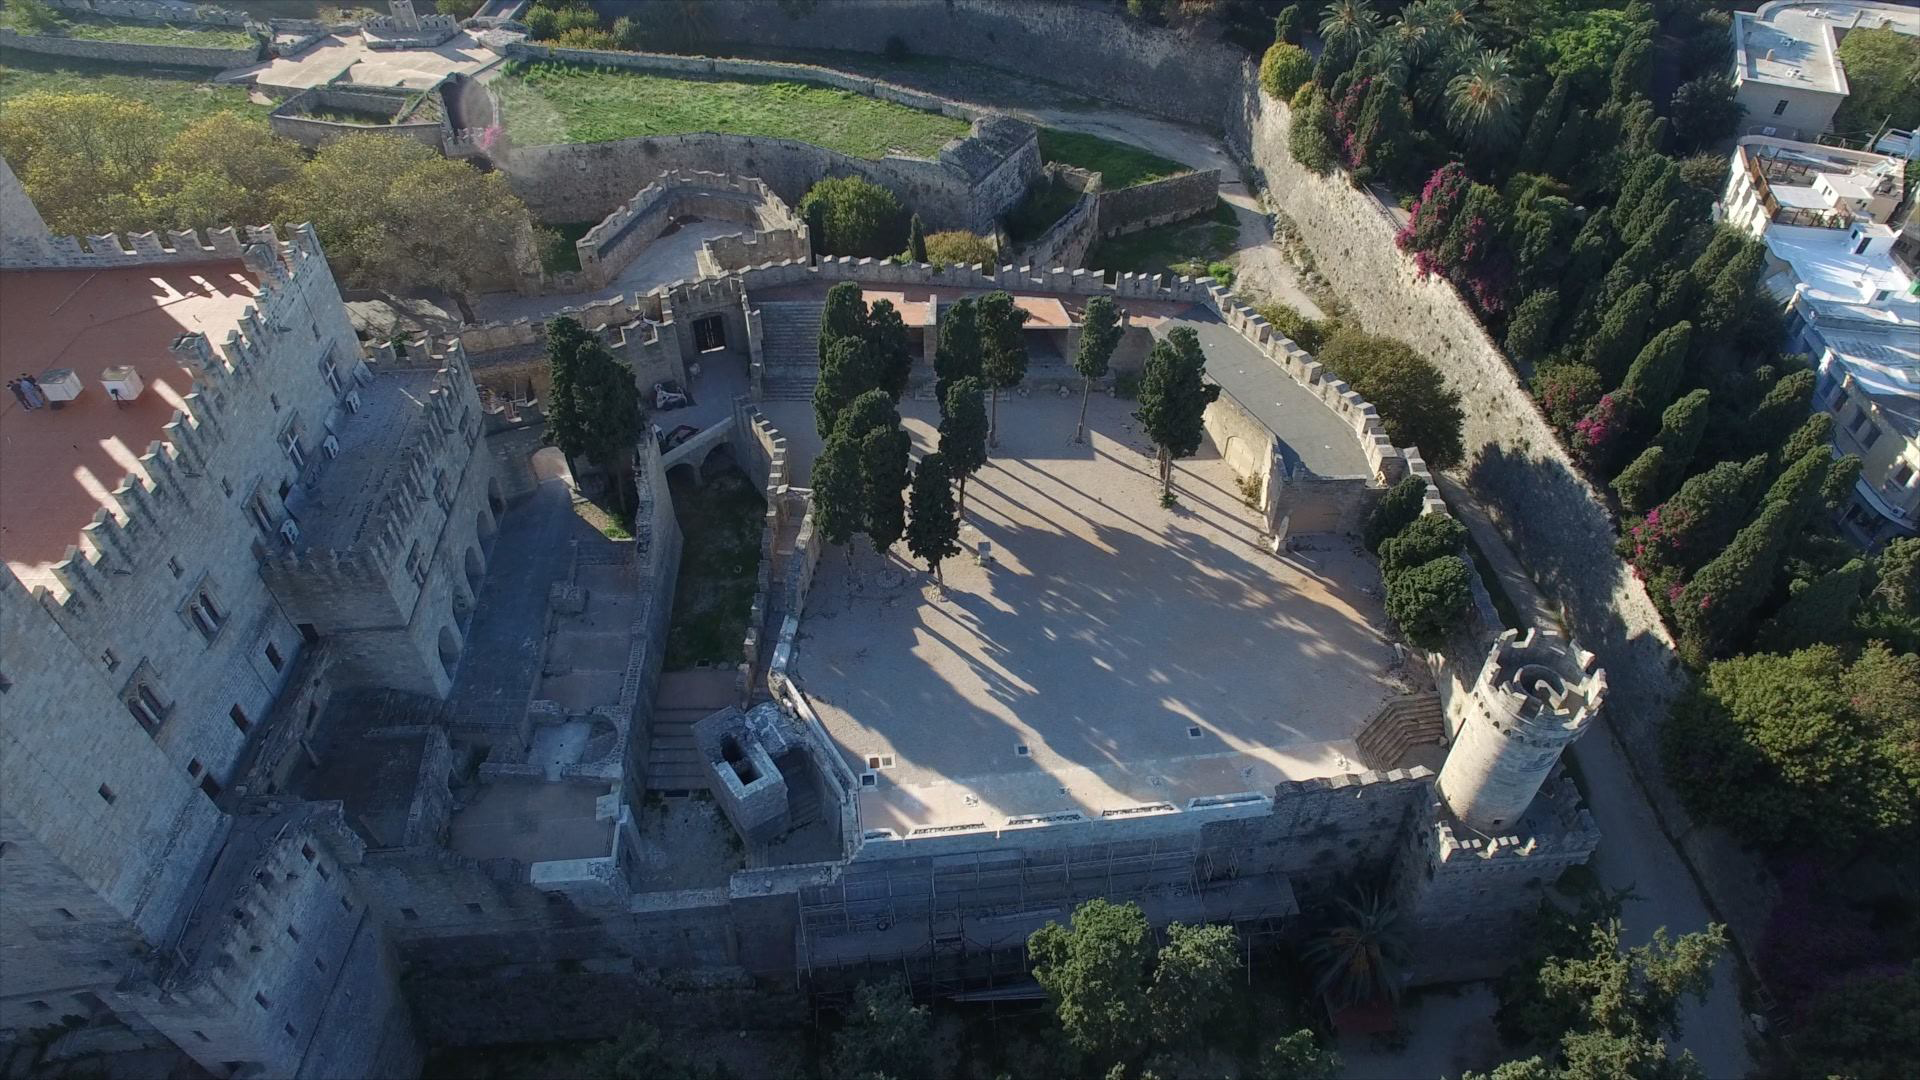 Image 'Bastion of the Grand Master's Palace in Rhodes'